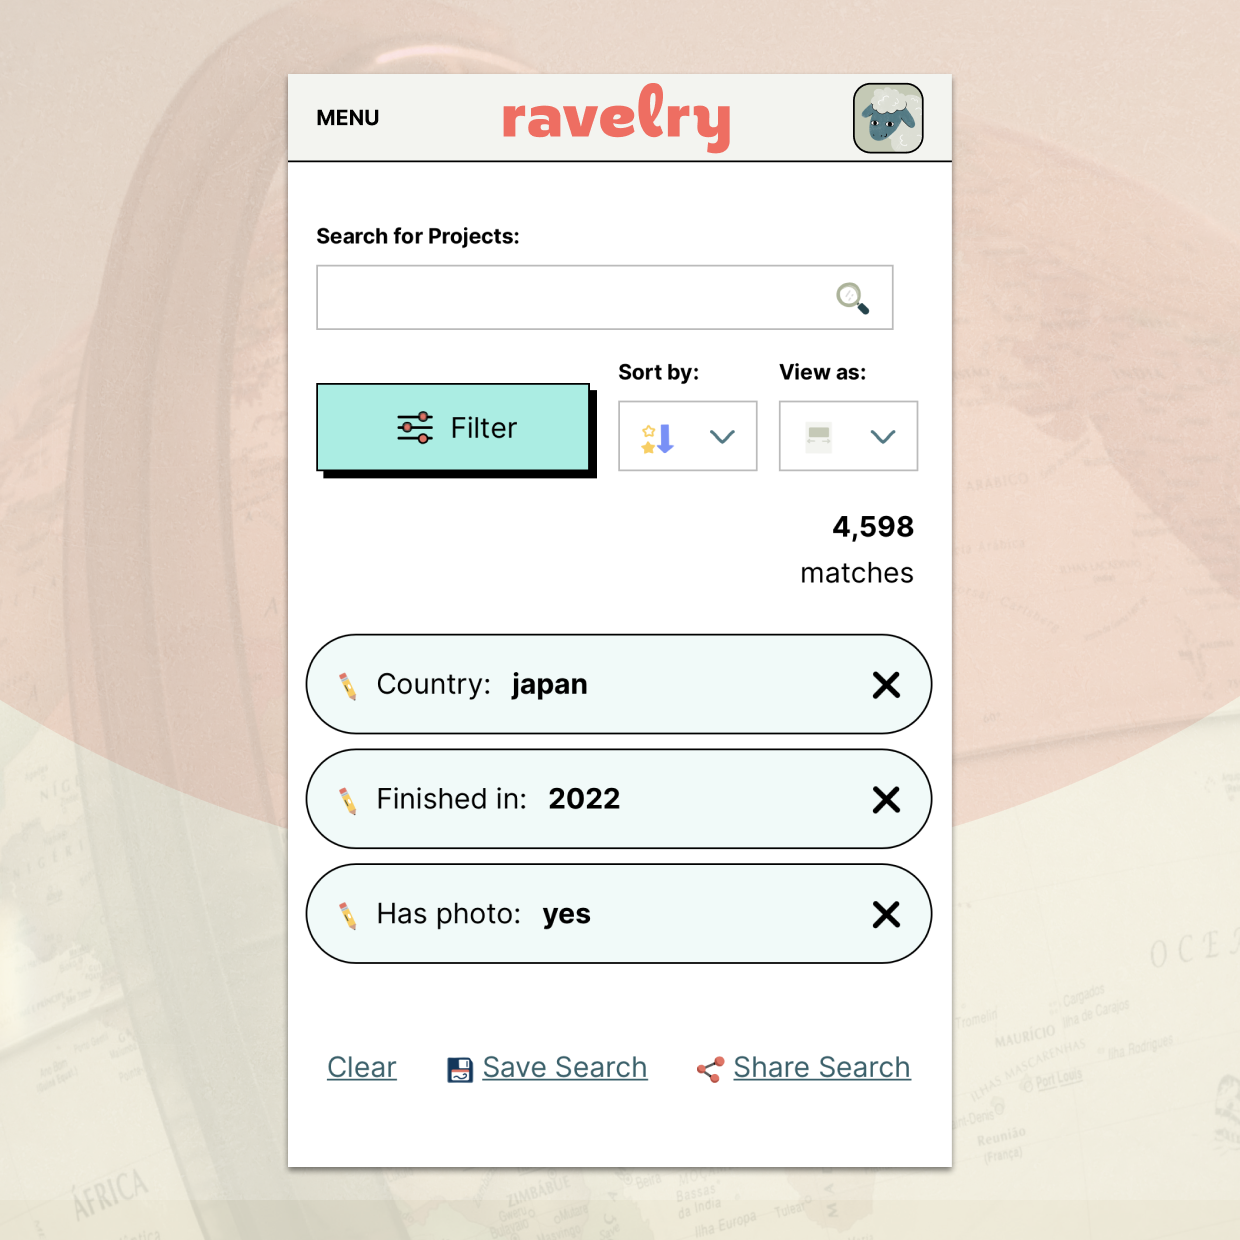 screenshot of Ravelry project search filters as displayed on a mobile device, with country: Japan, Finished in: 2022, and Has photo: yes selected